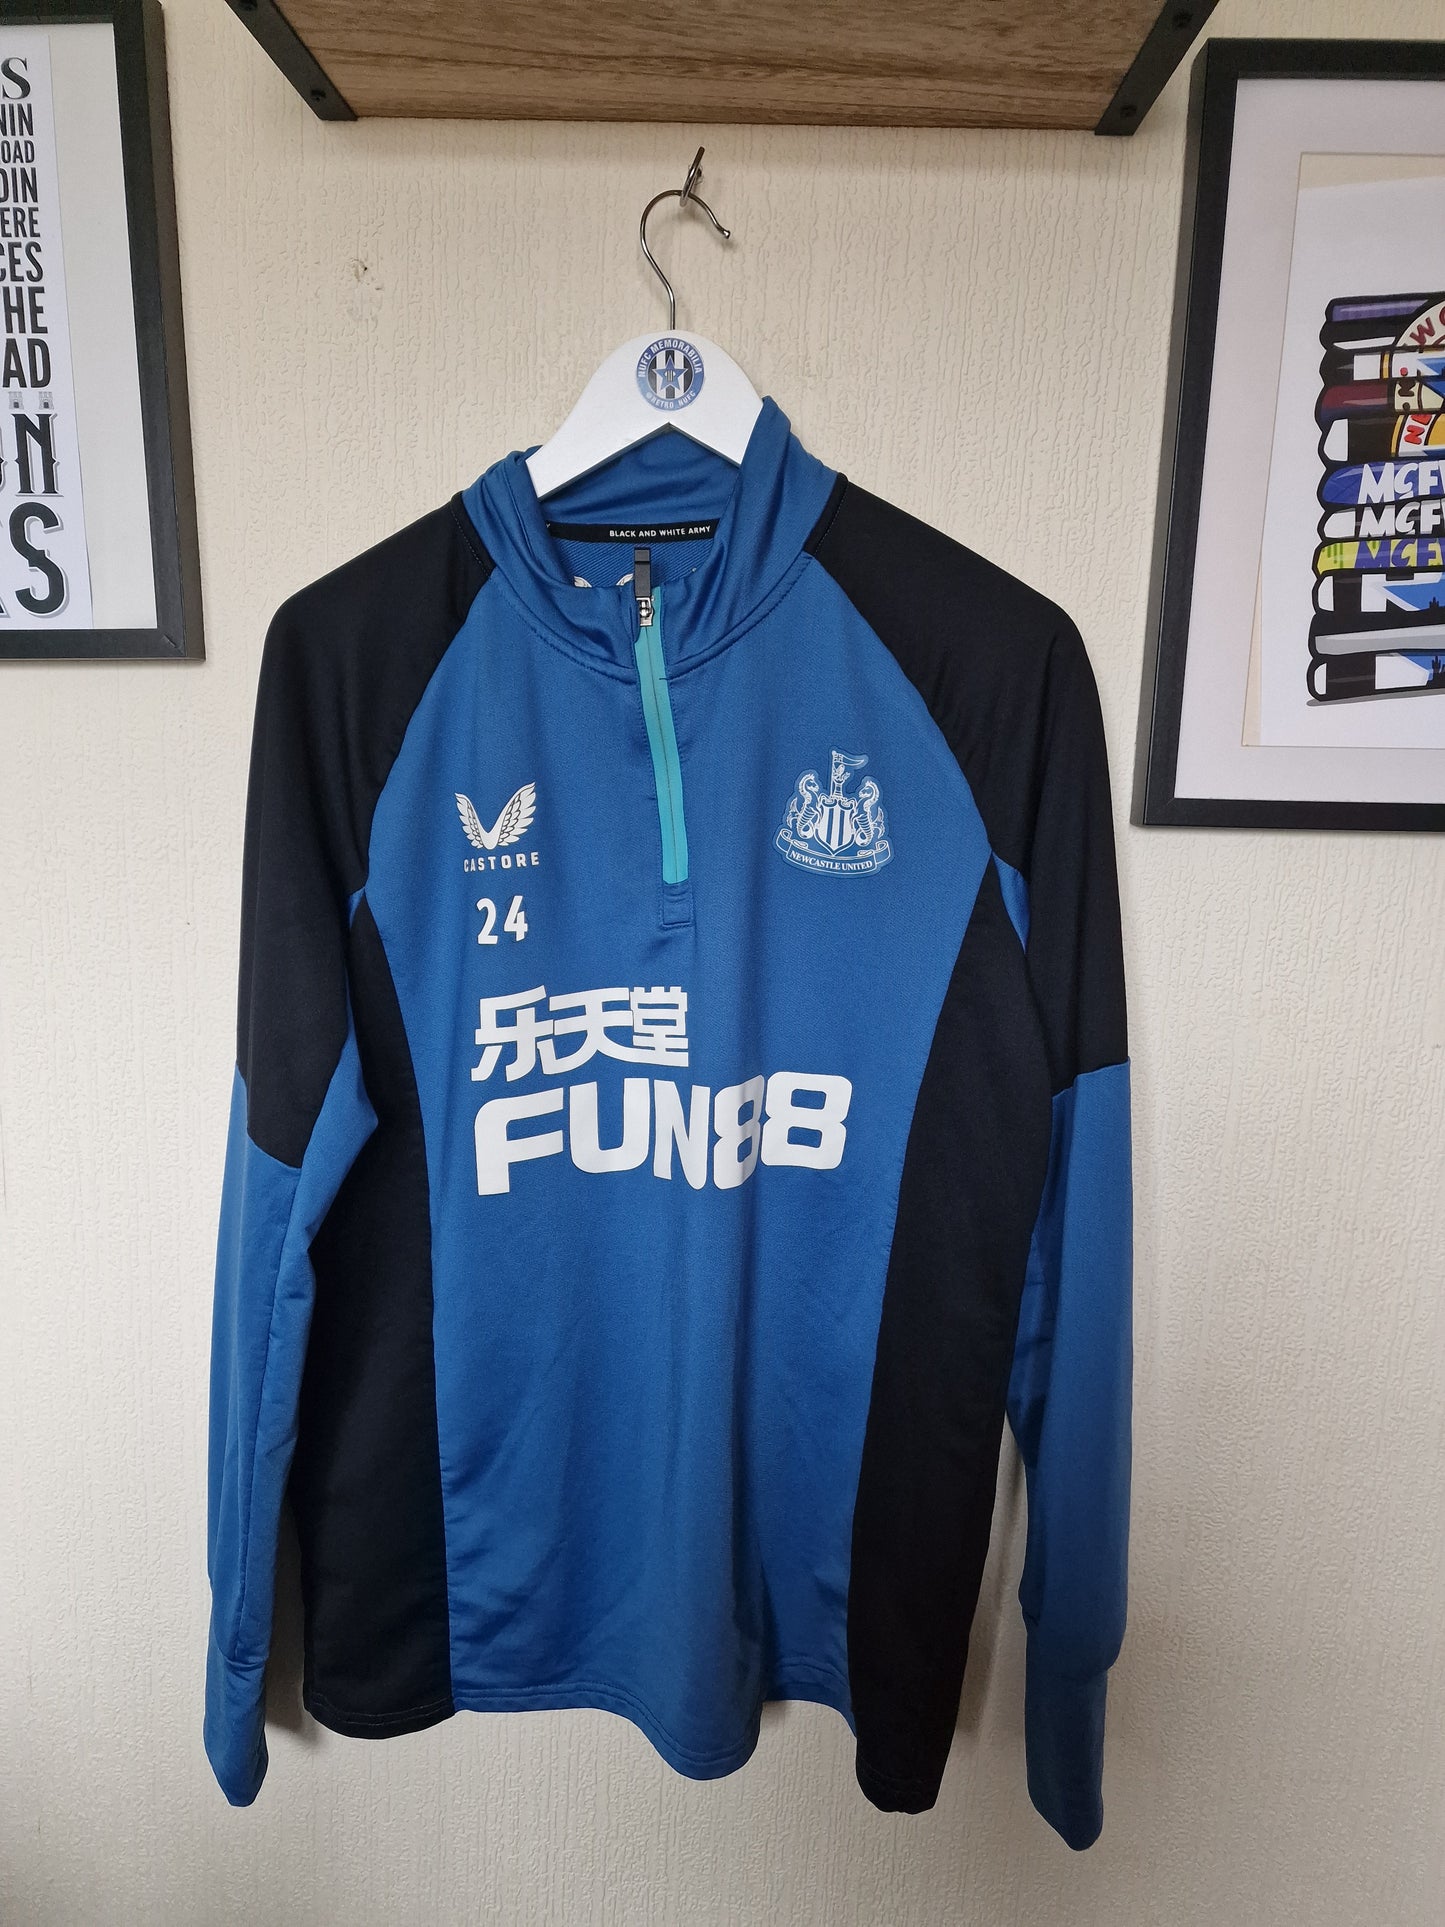 Newcastle United 2021/22 Miguel Almiron worn training top